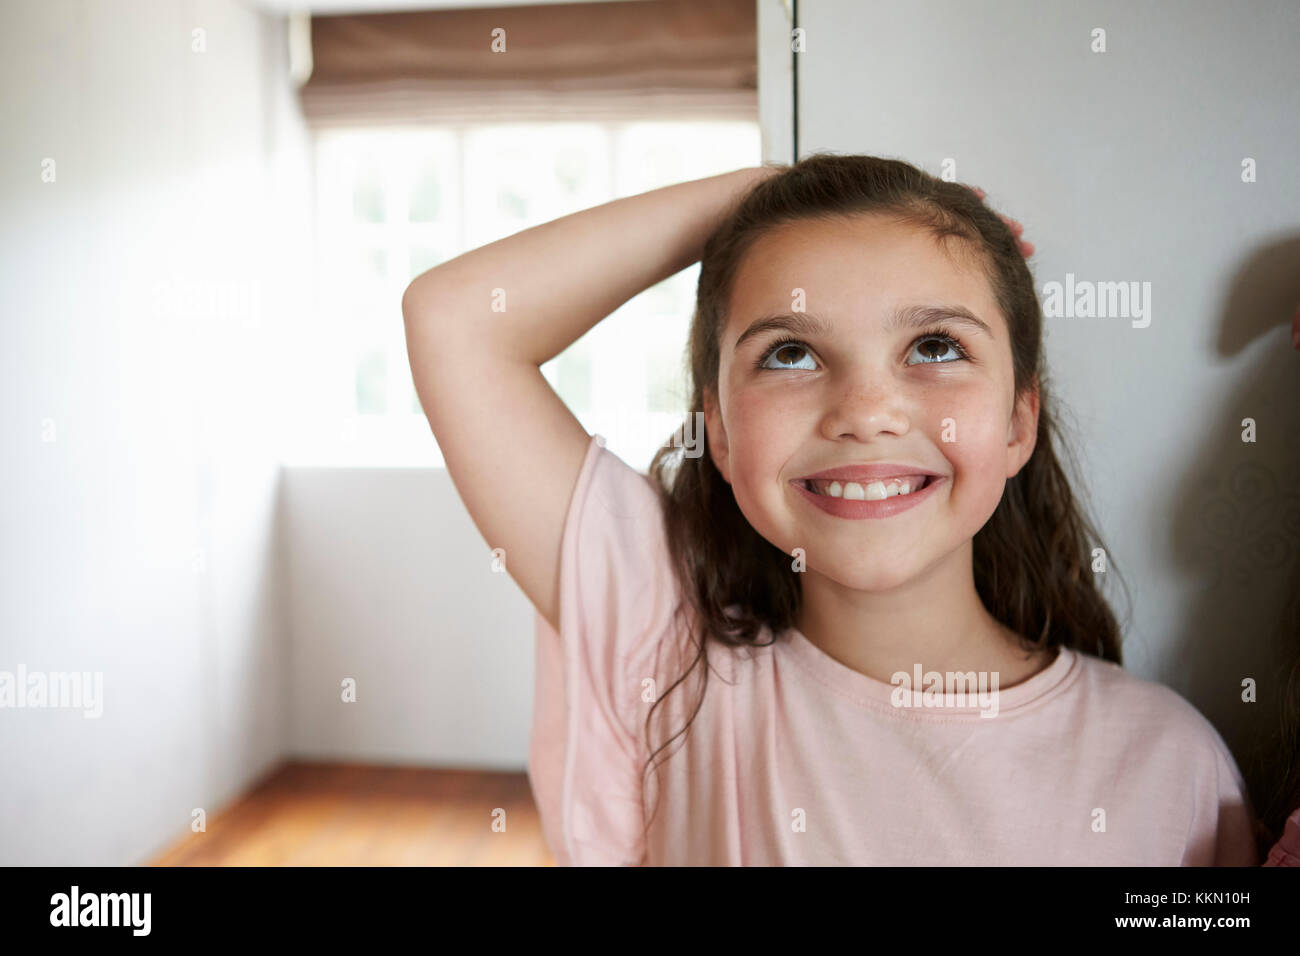 Girl Measuring Height Standing Against Wall At Home Stock Photo